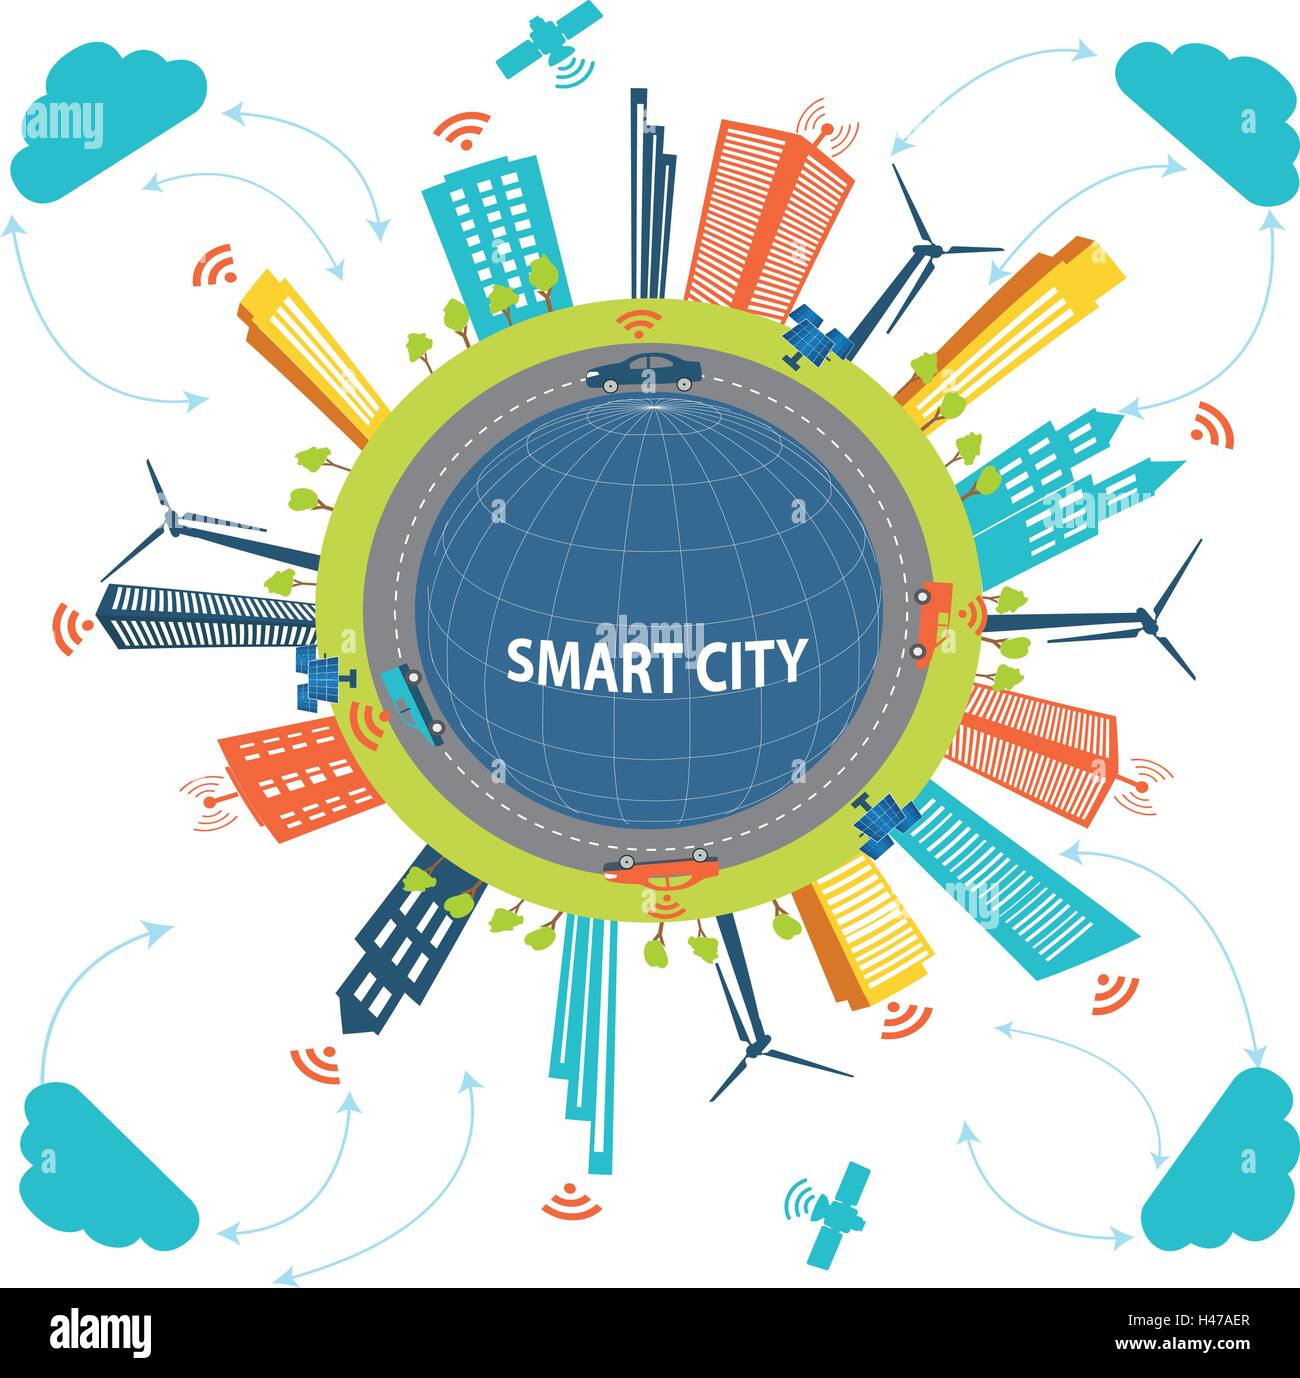 Smart City concept and Cloud computing technology  Internet networking concept  with different elements. Smart city design with Stock Vector